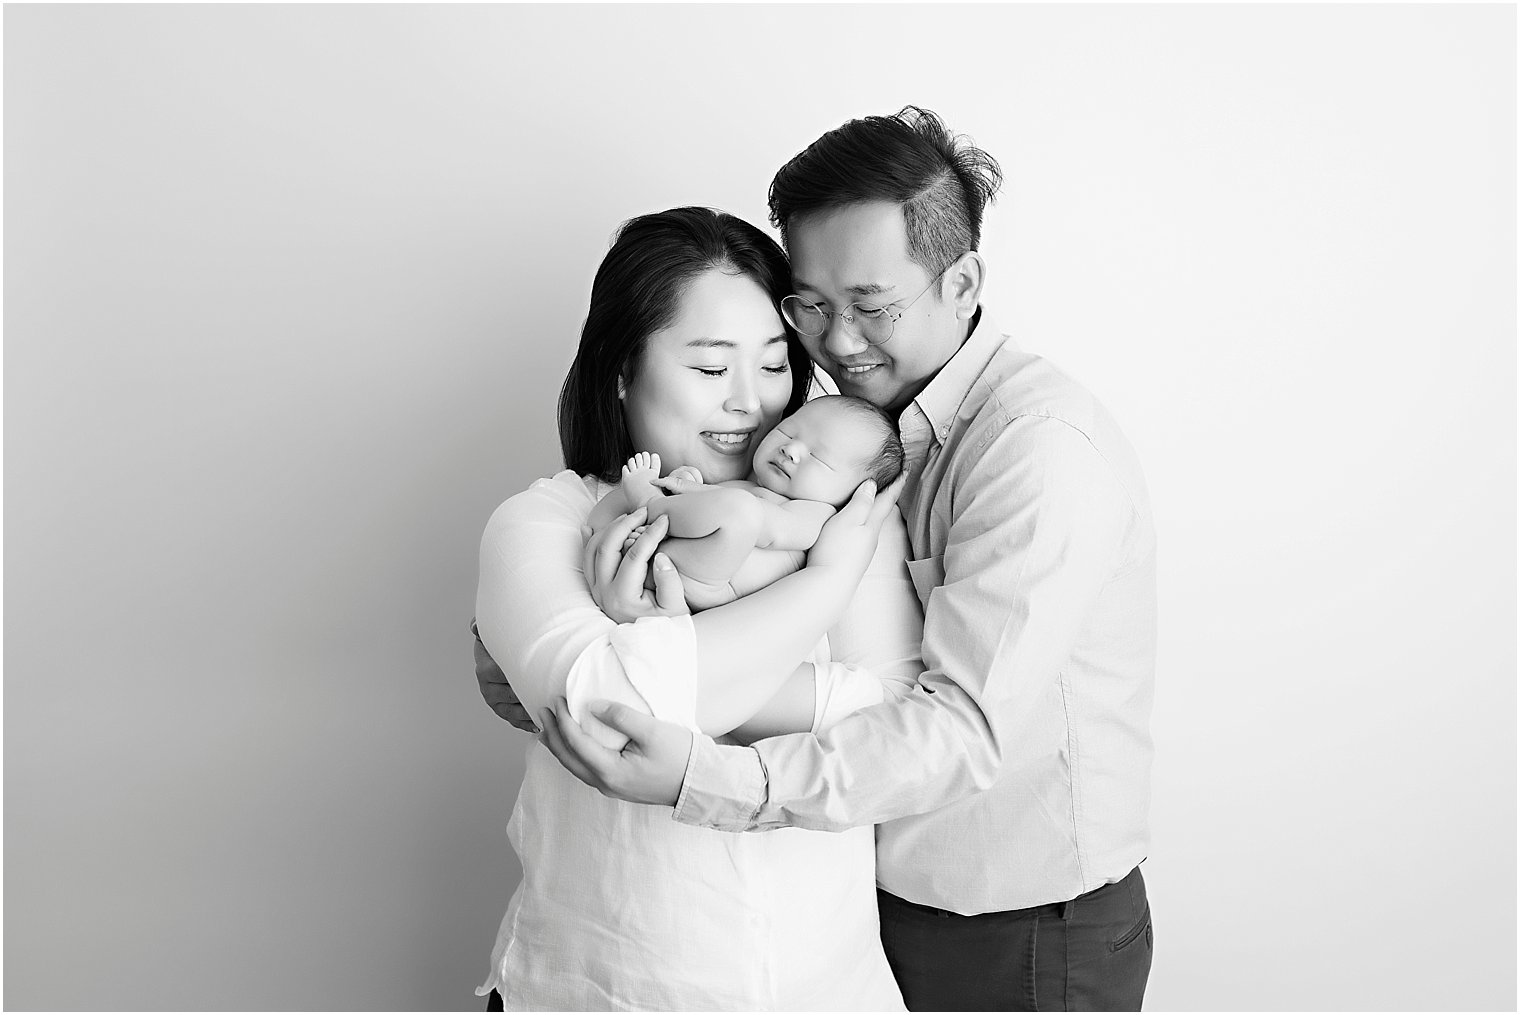 Black and white image of parents holding their new baby